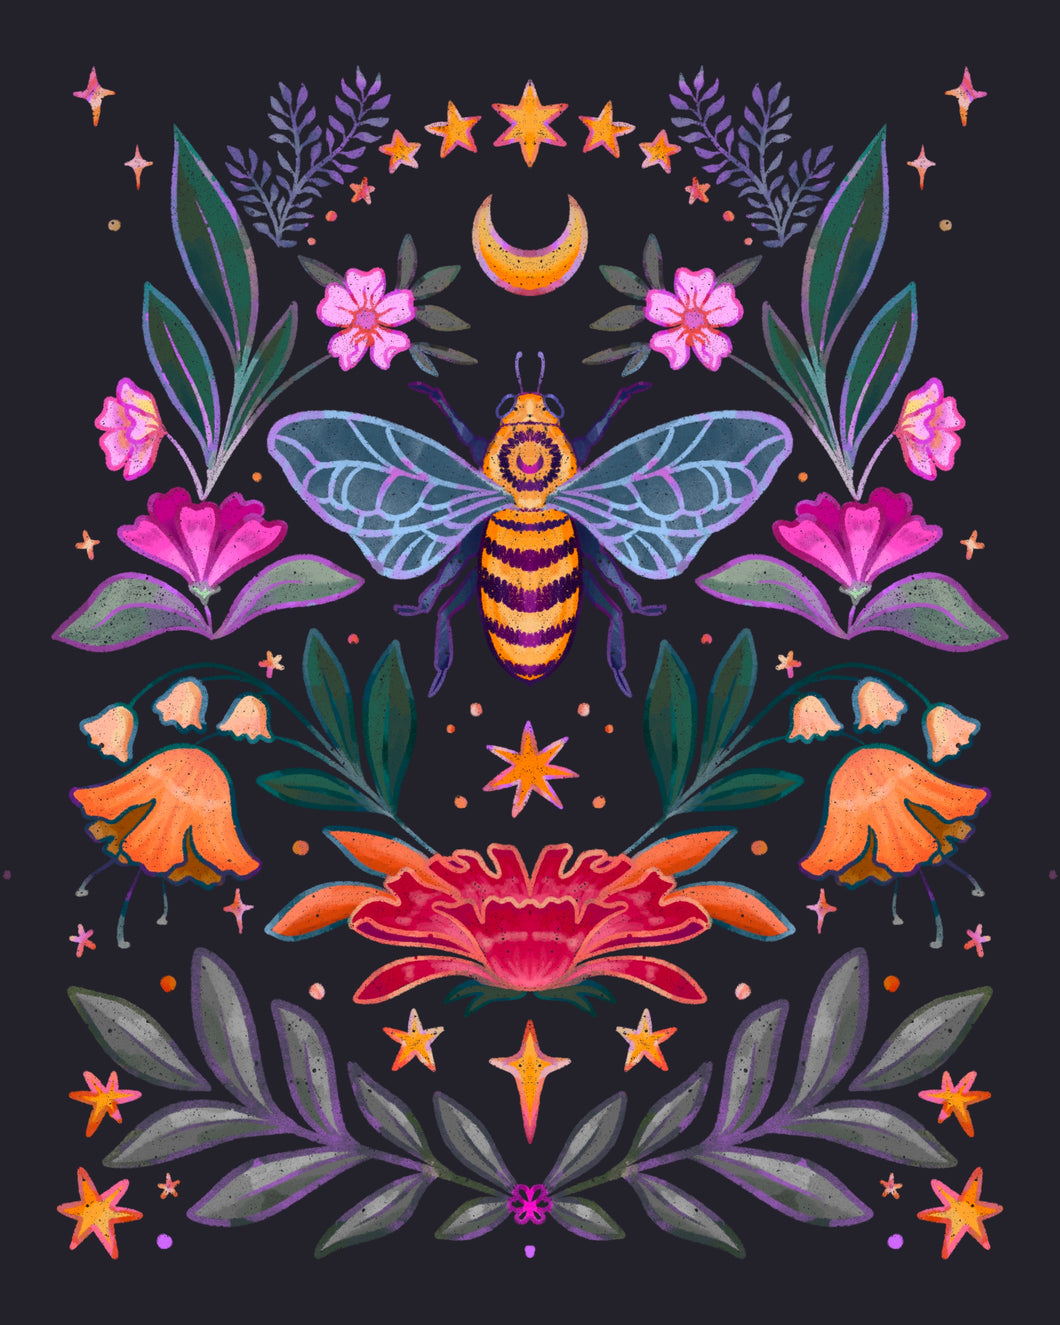 Bee and Flowers Art Print, 8x10 in.